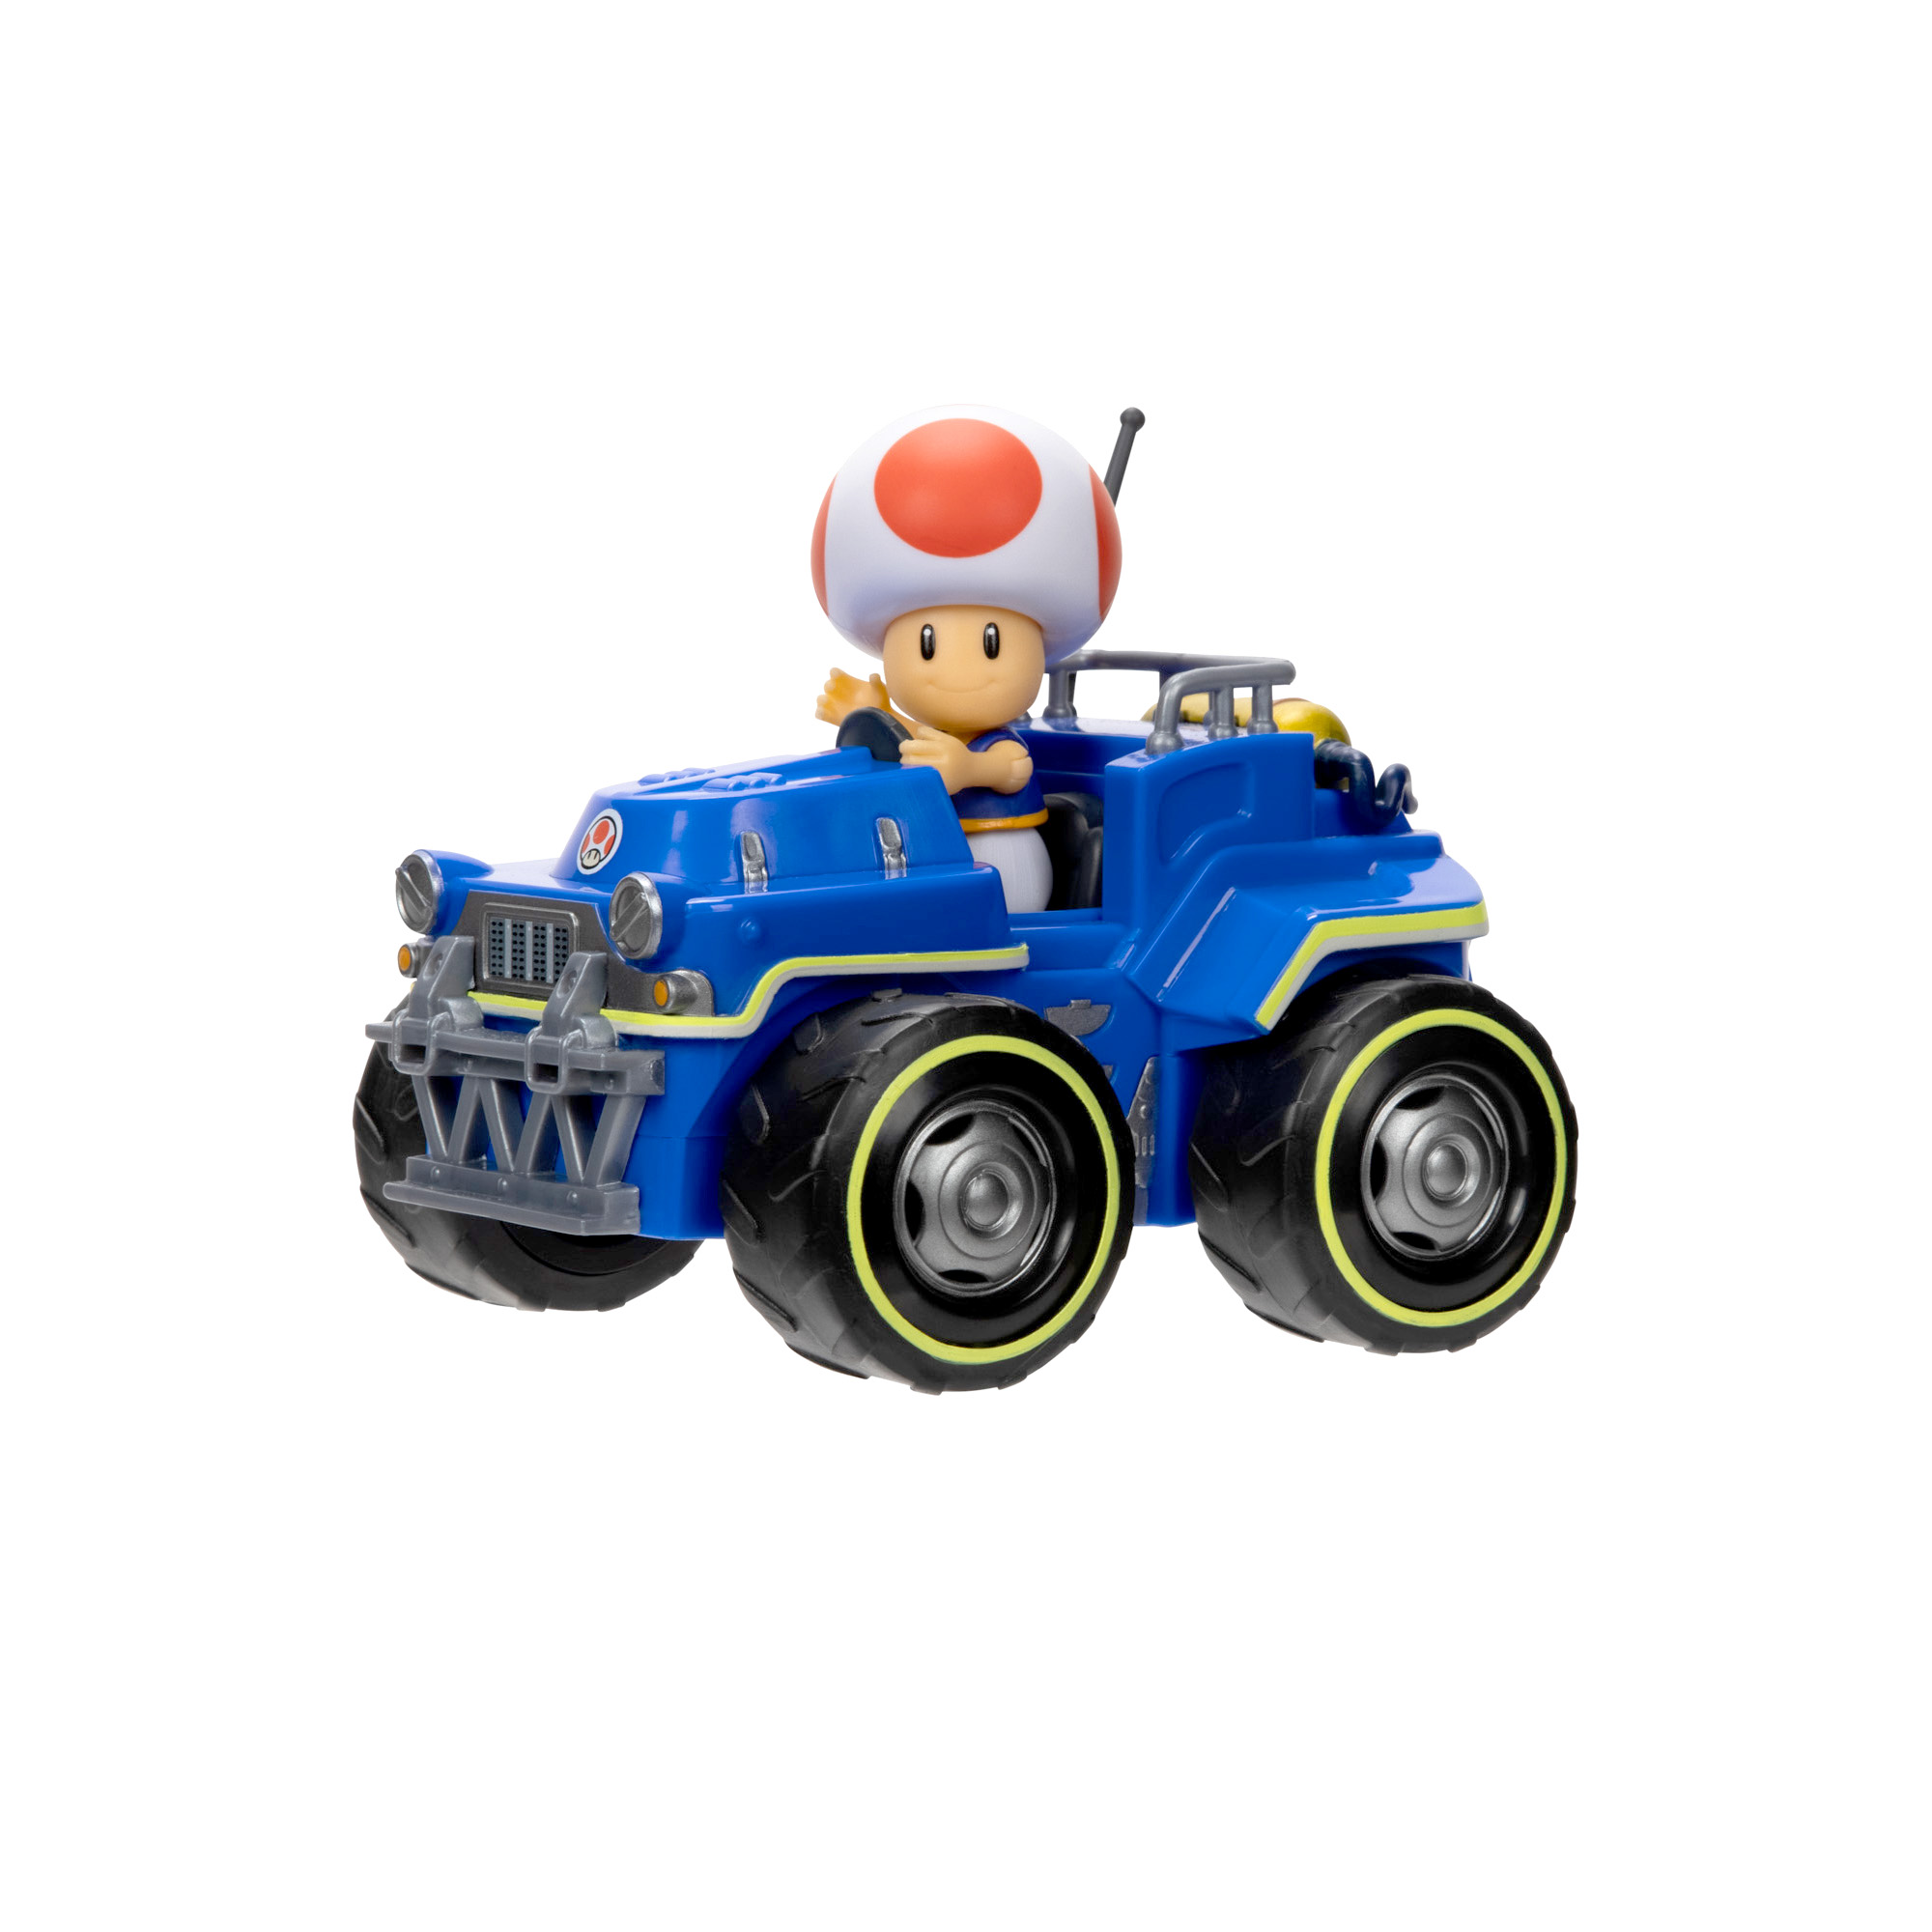 2.5” Toad Figure with Pull Back Racer